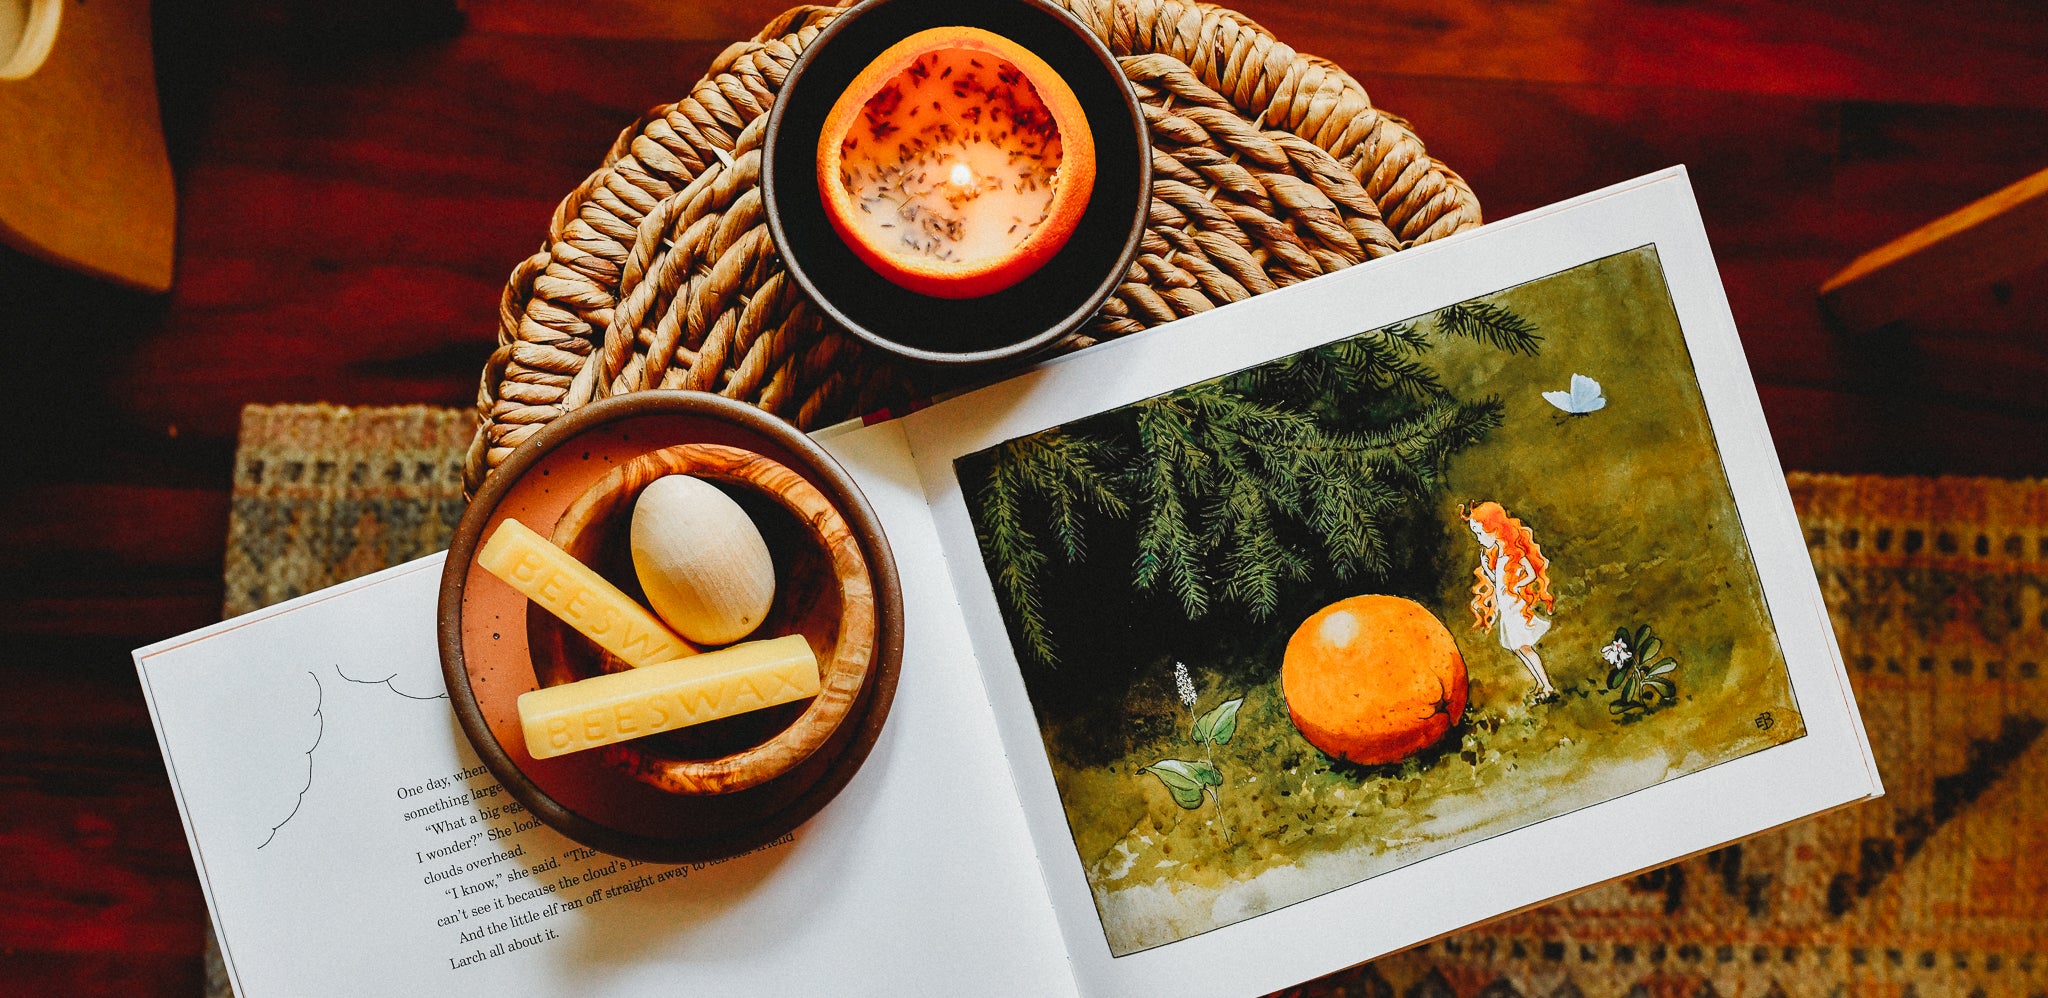 Orange peel beeswax candle lit on a table next to an open book, The Sun Egg by Elsa Beskow.